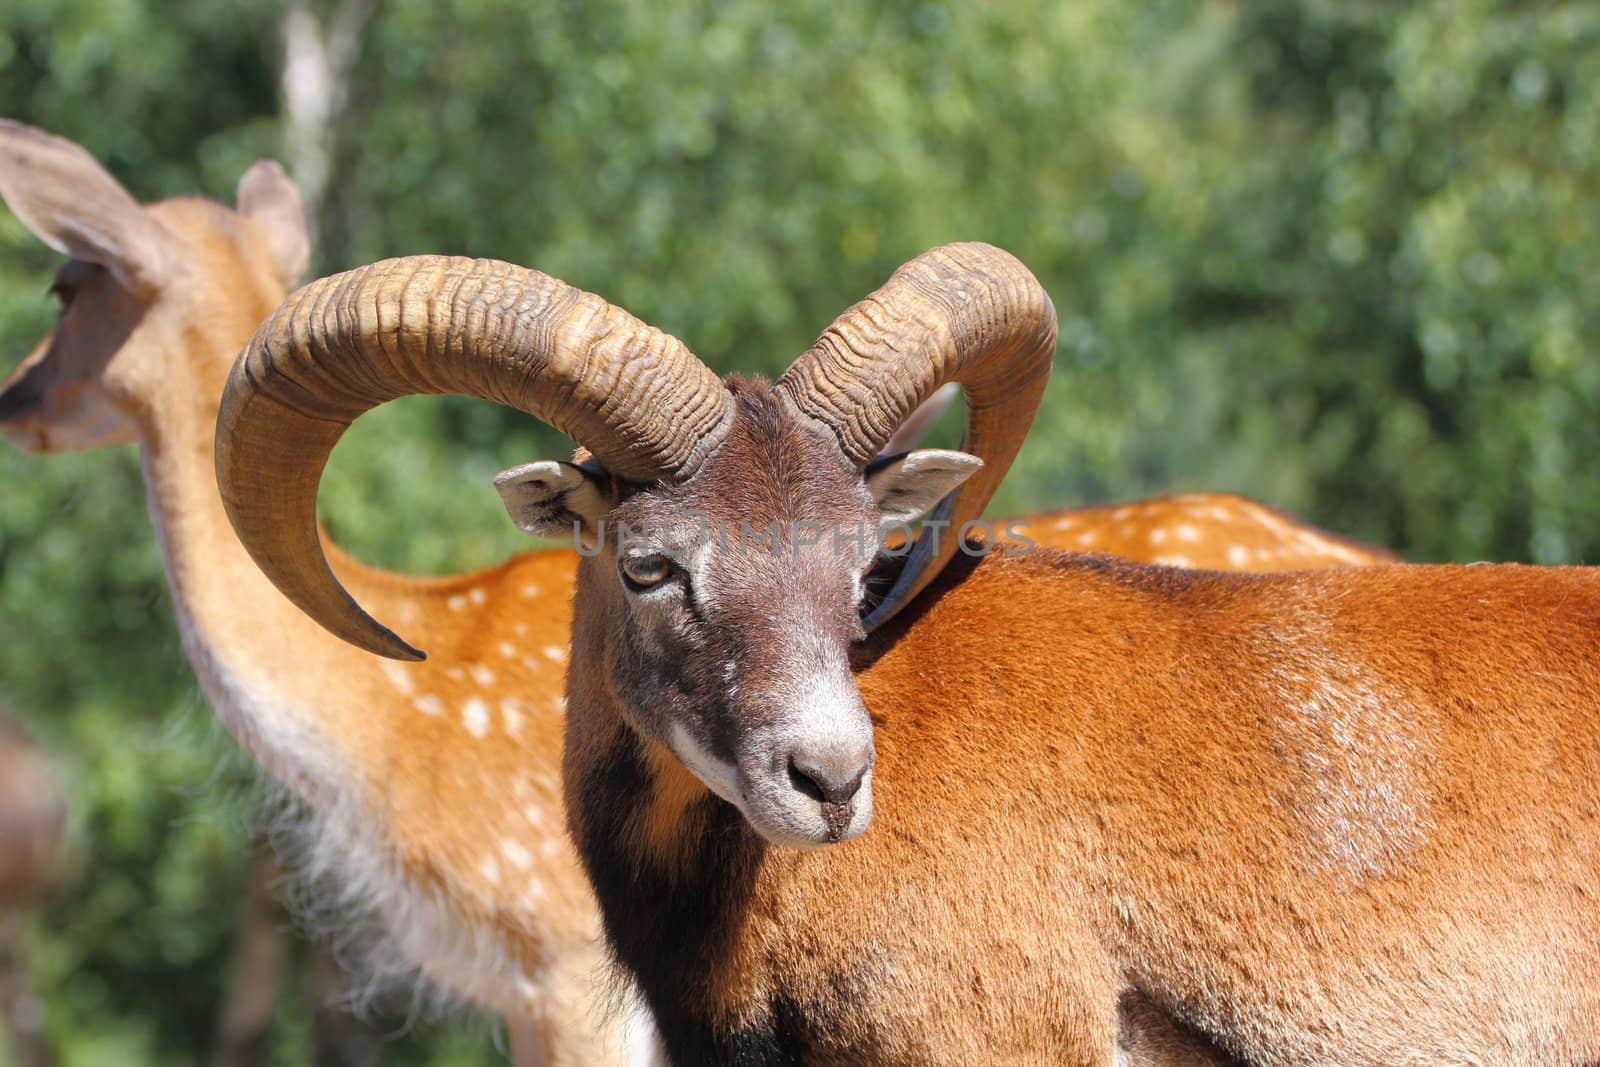 beautiful mouflon ram standing with a herd of fallow deers in an animal enclosure